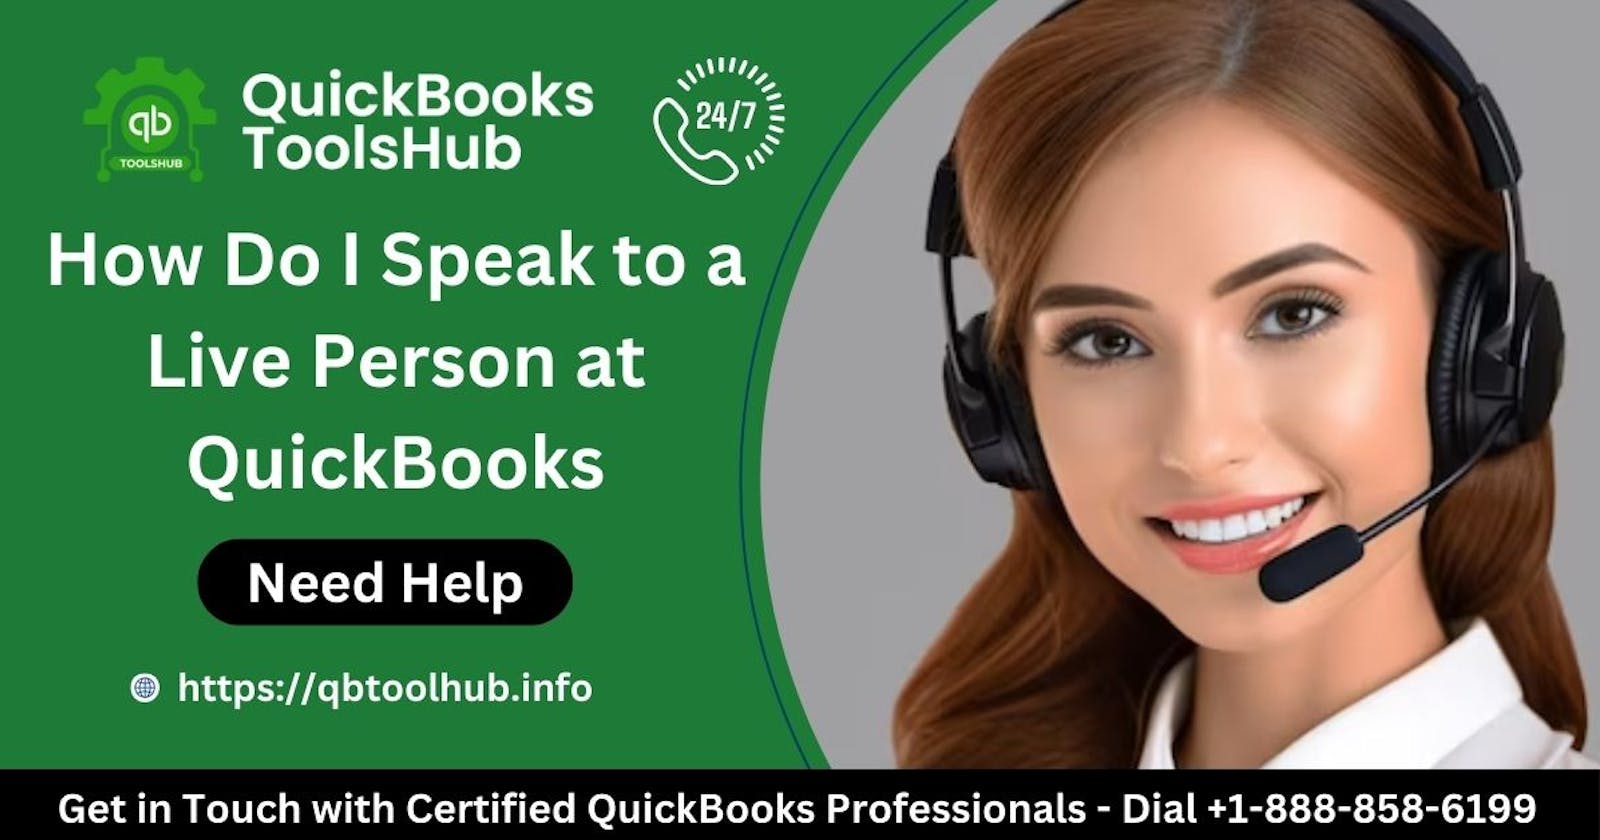 Check Here For A Quick Guide On QuickBooks Installation Error 1603